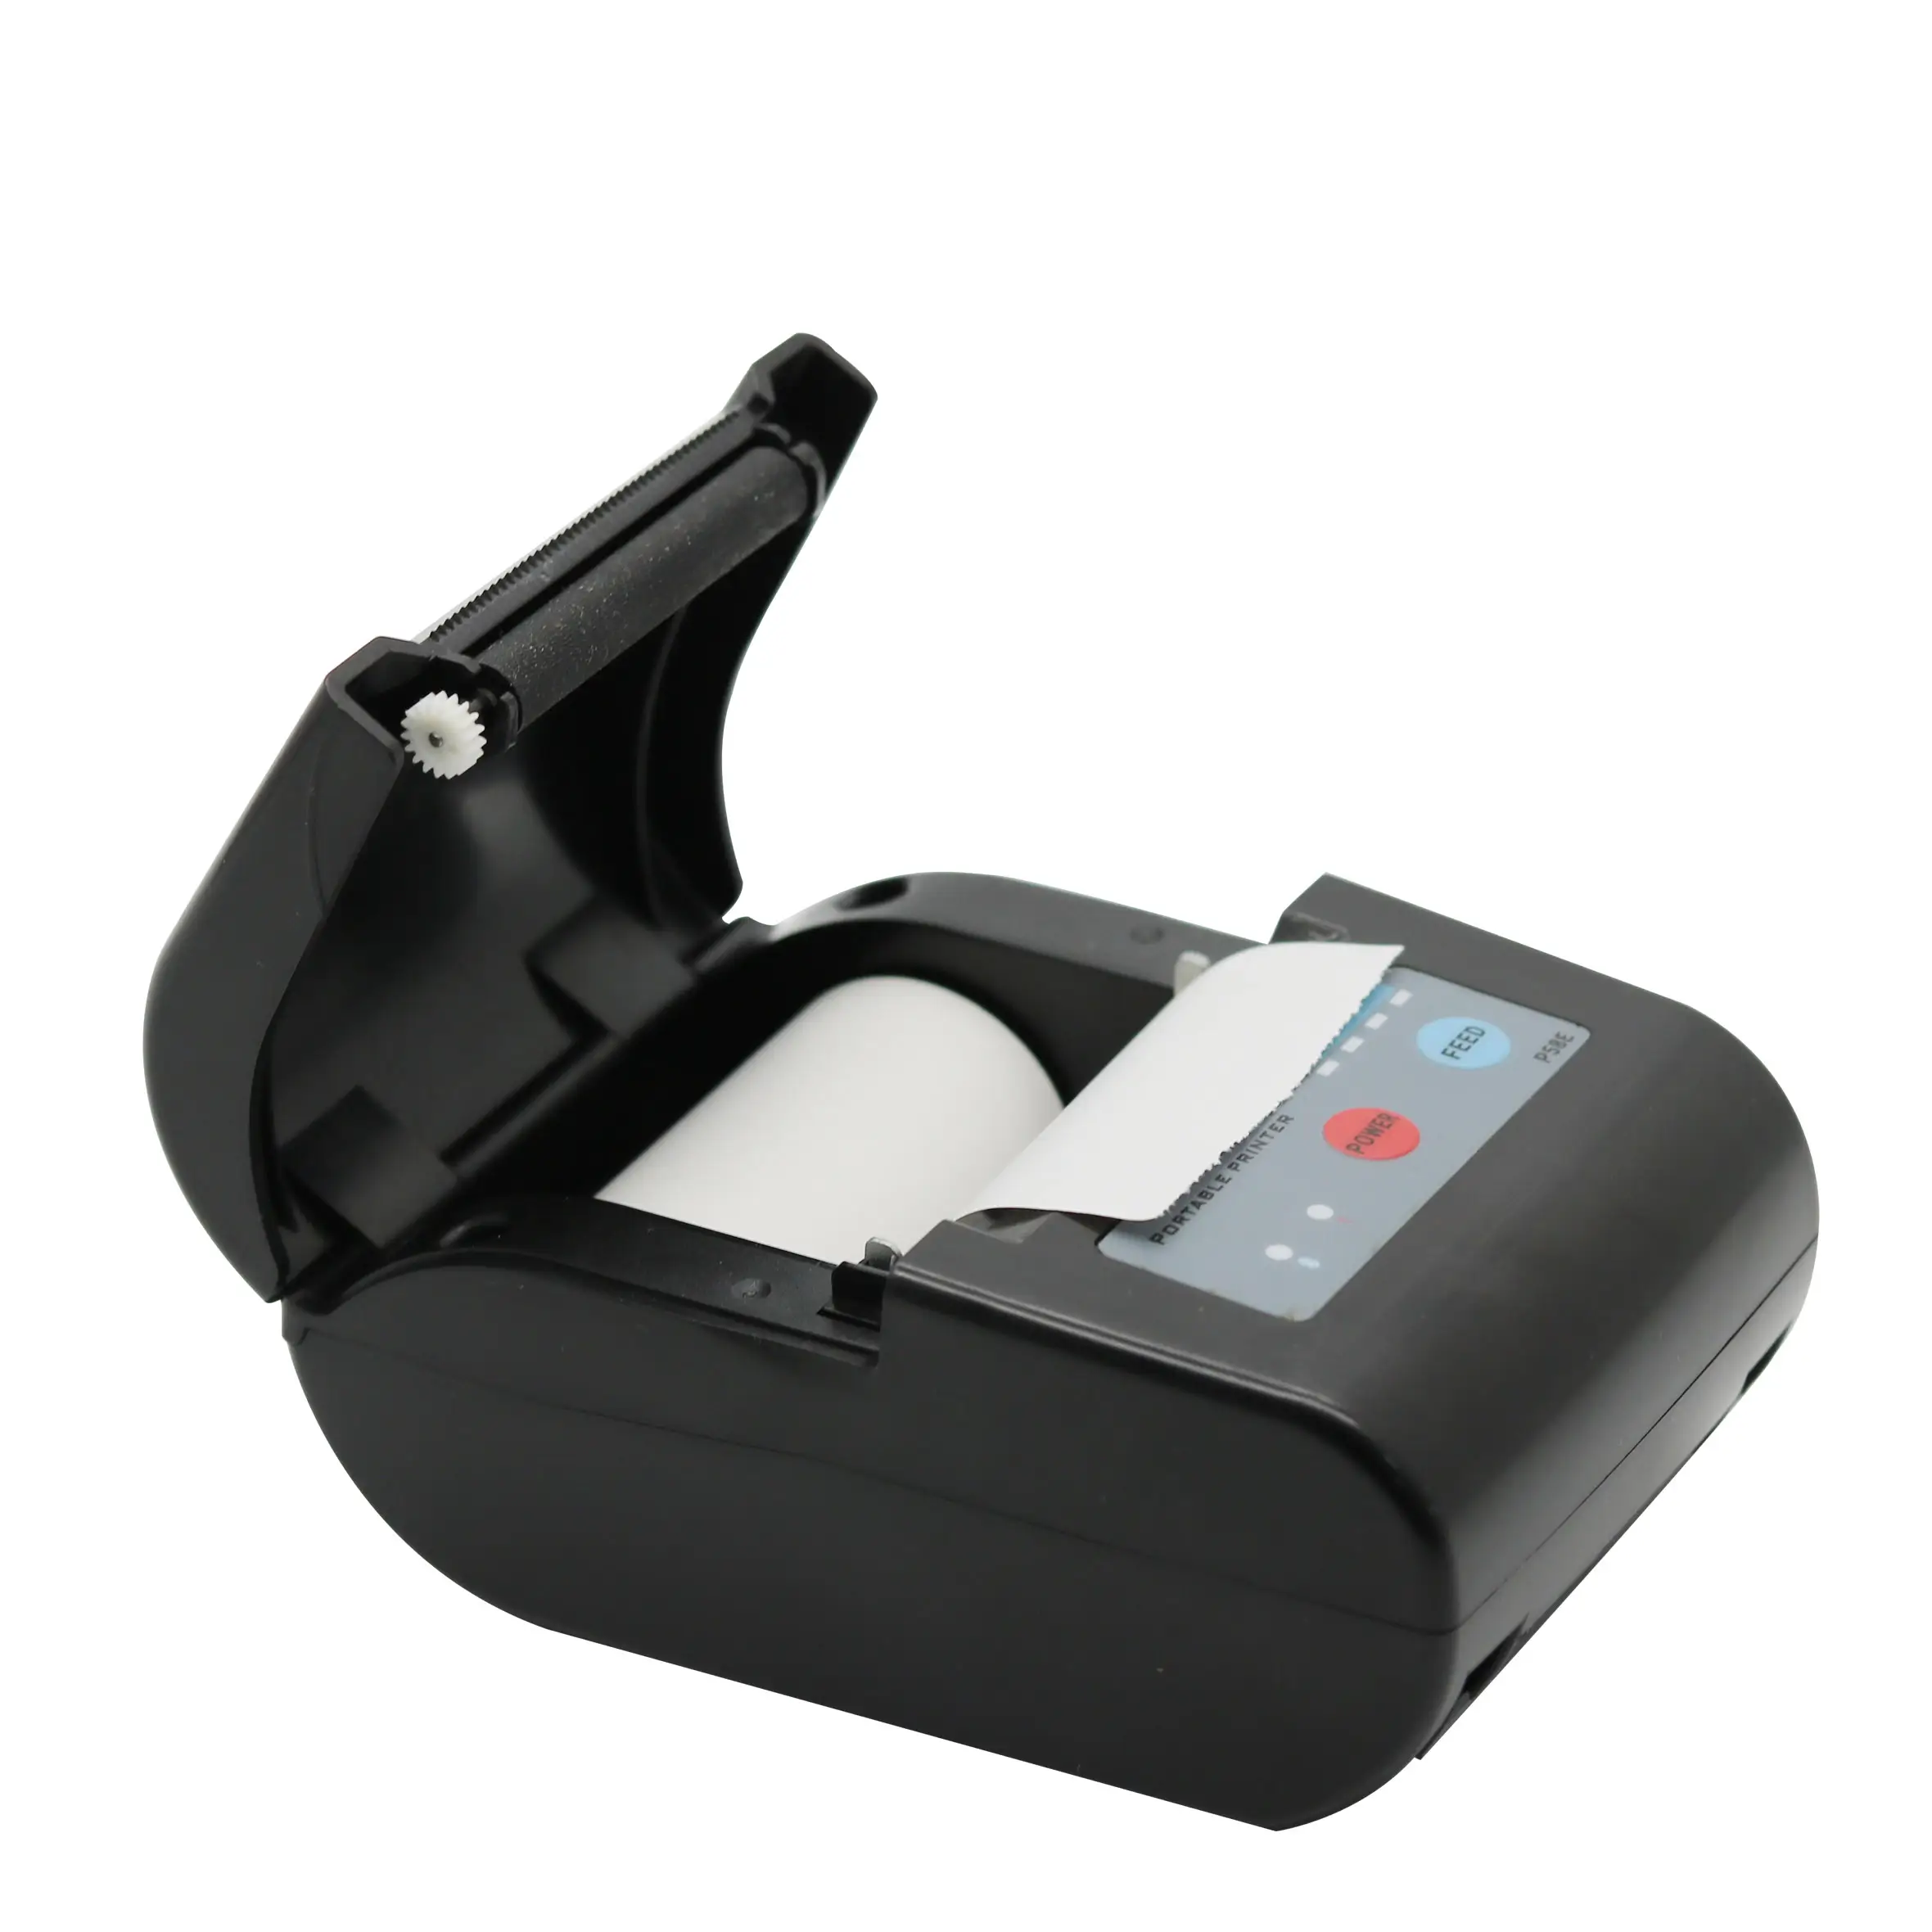 58mm Bluetooth Mobile Portable Bill Printer Wireless Thermal POS receipt Printer For Mobile Phone